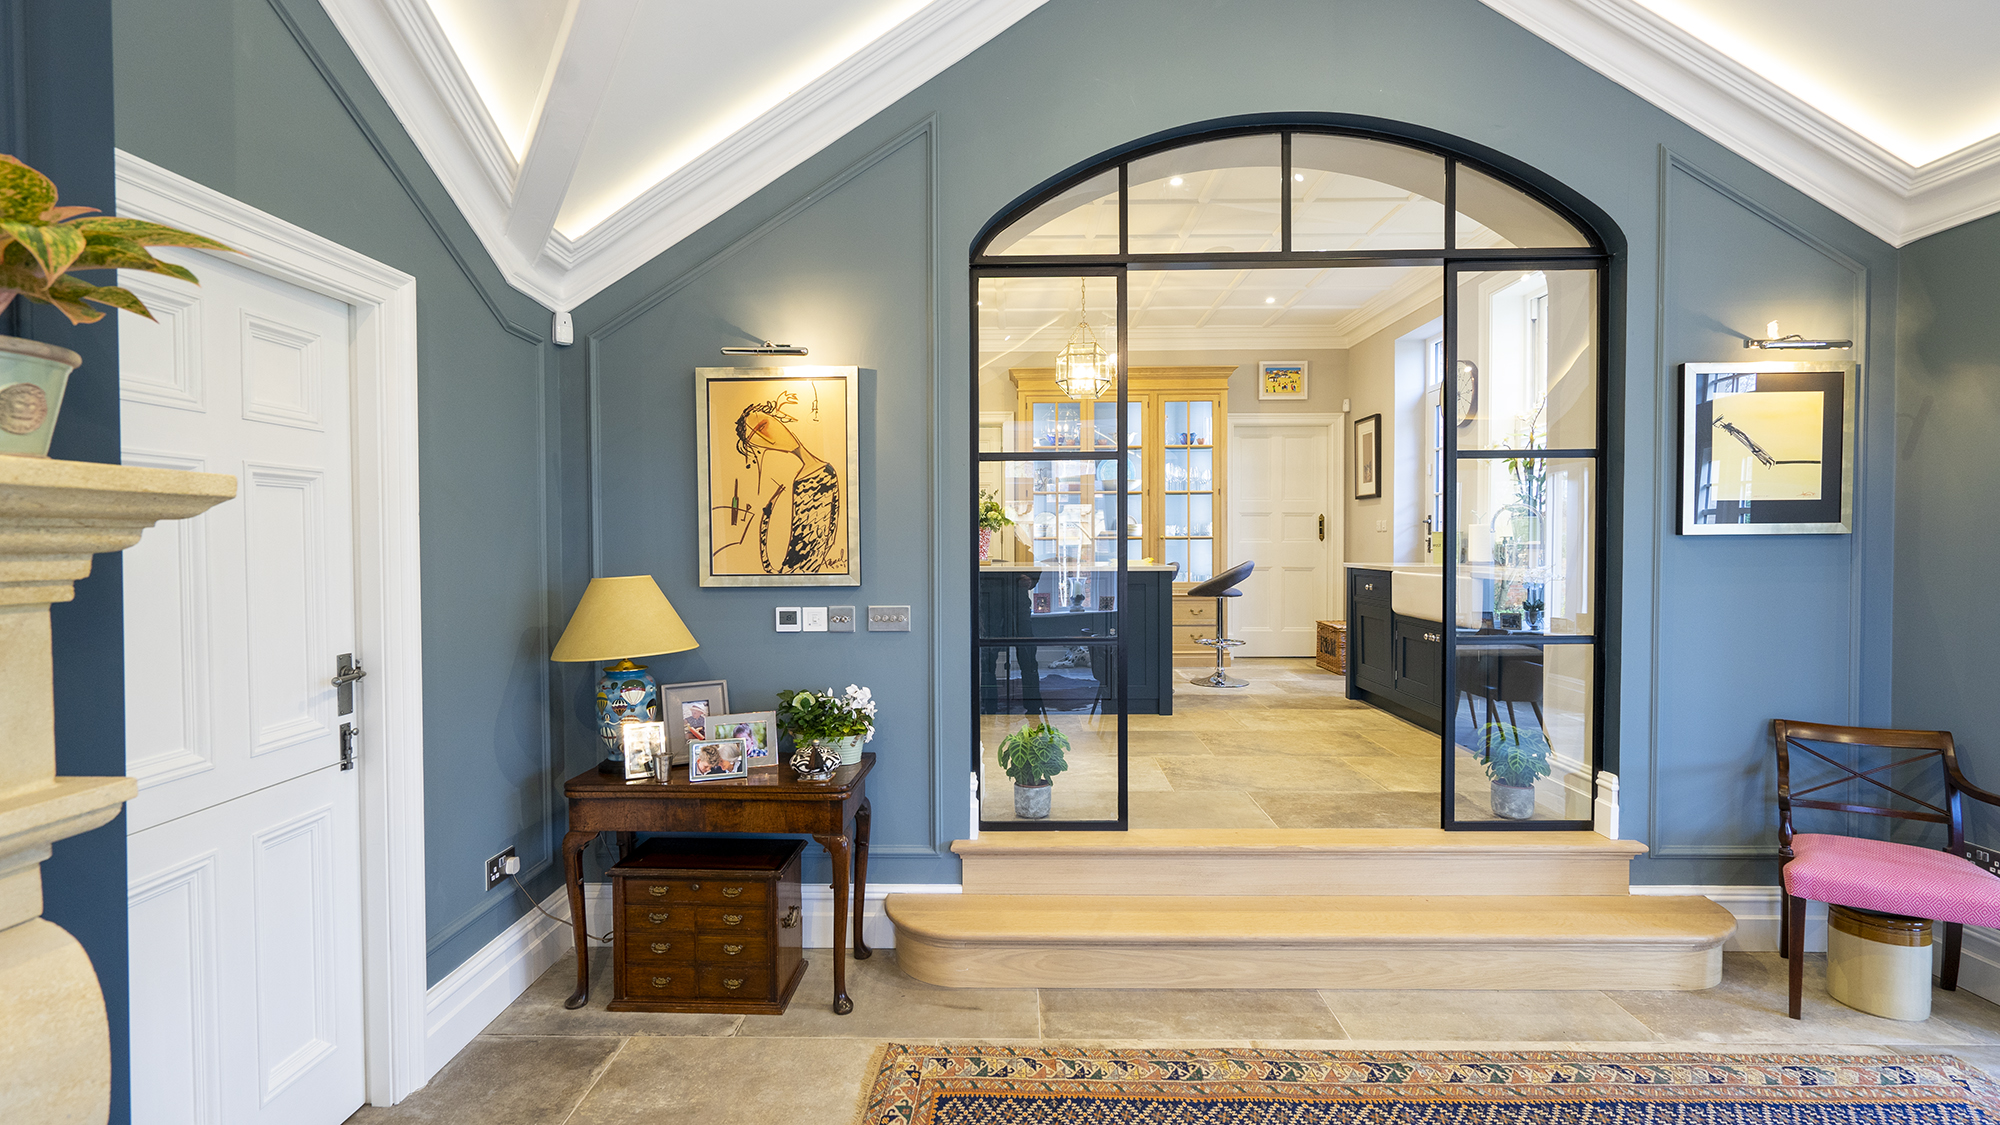 AUTHENTIC CRITTALL – THE REAL STEEL DEAL @crittallwindows